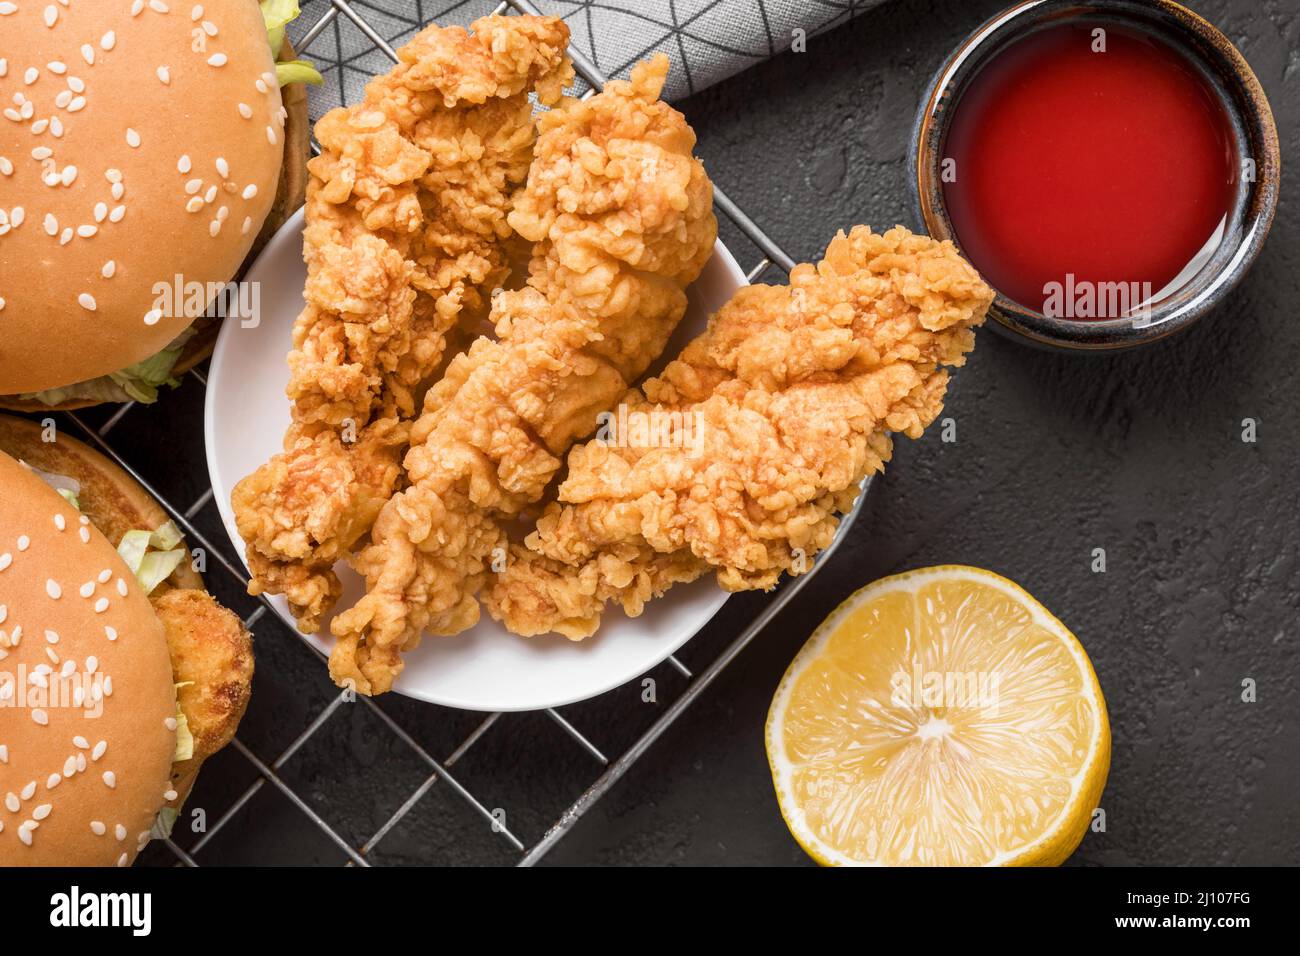 Top view fried chicken burgers tray with sauce lemon Stock Photo